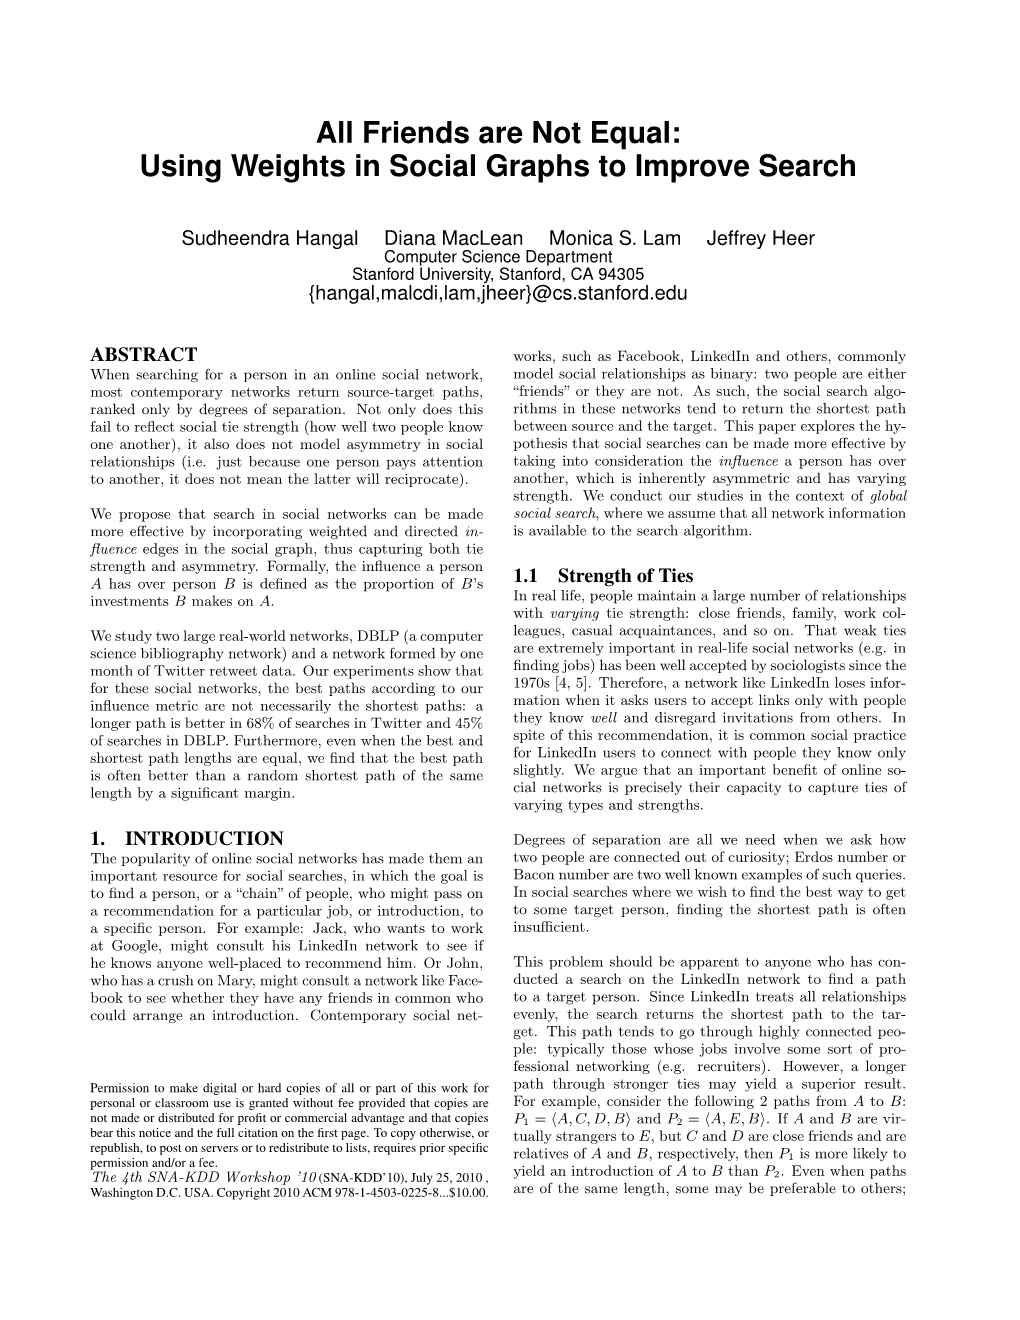 All Friends Are Not Equal: Using Weights in Social Graphs to Improve Search